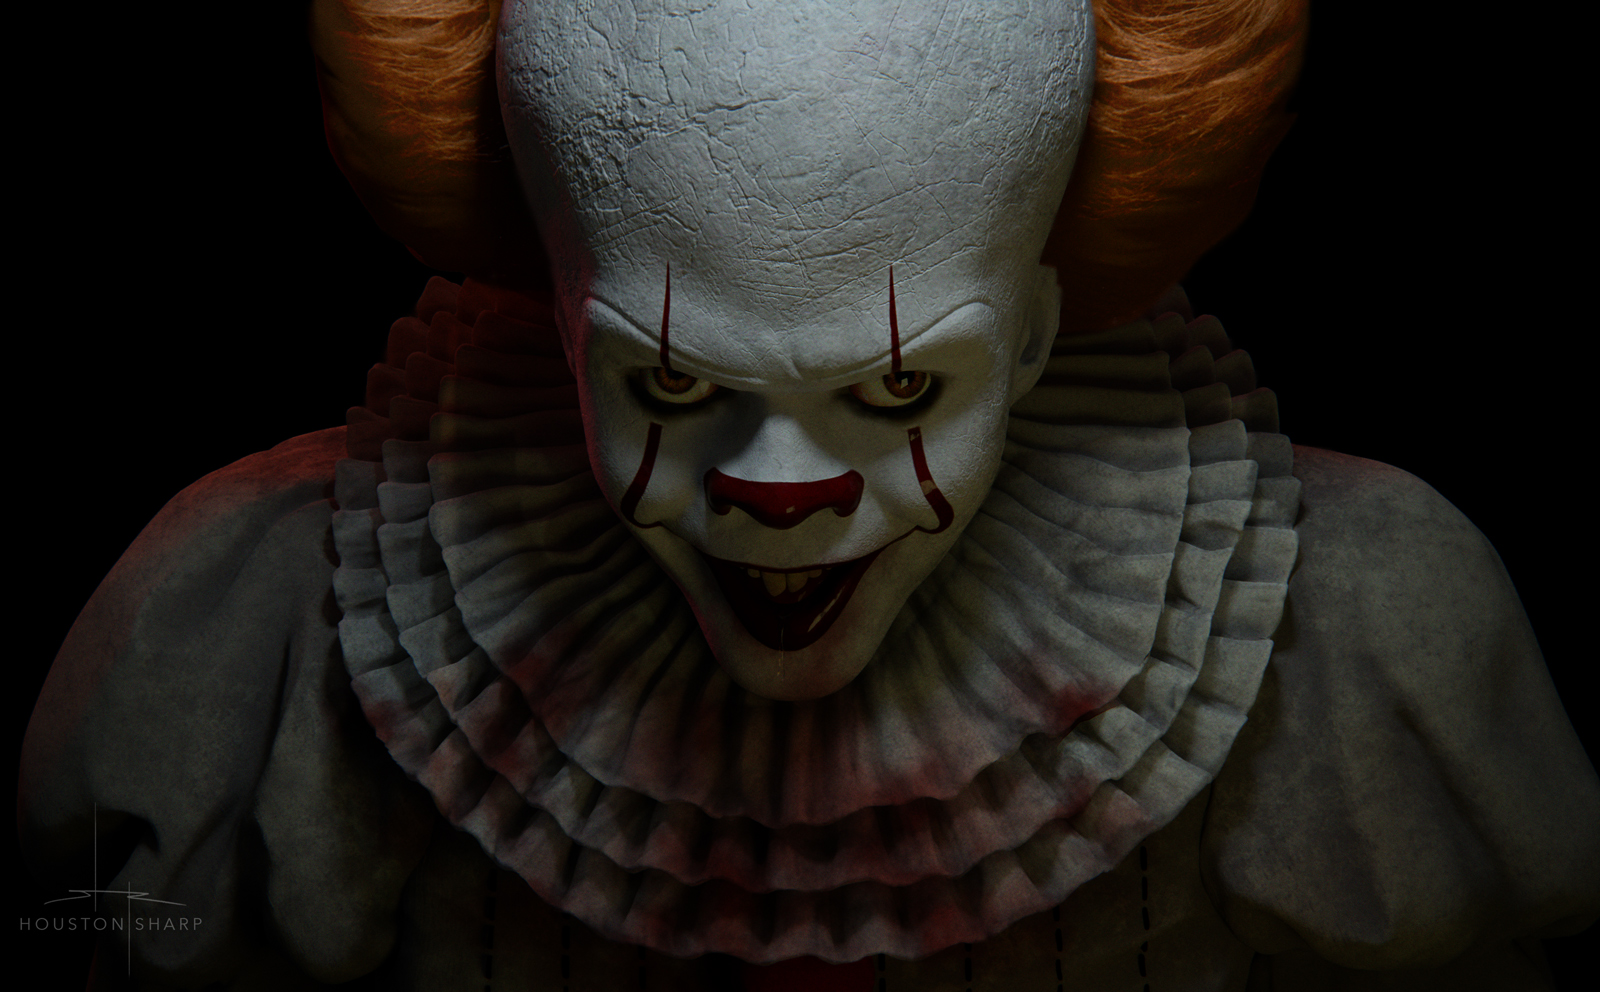 pennywise_frontmed1600.jpg